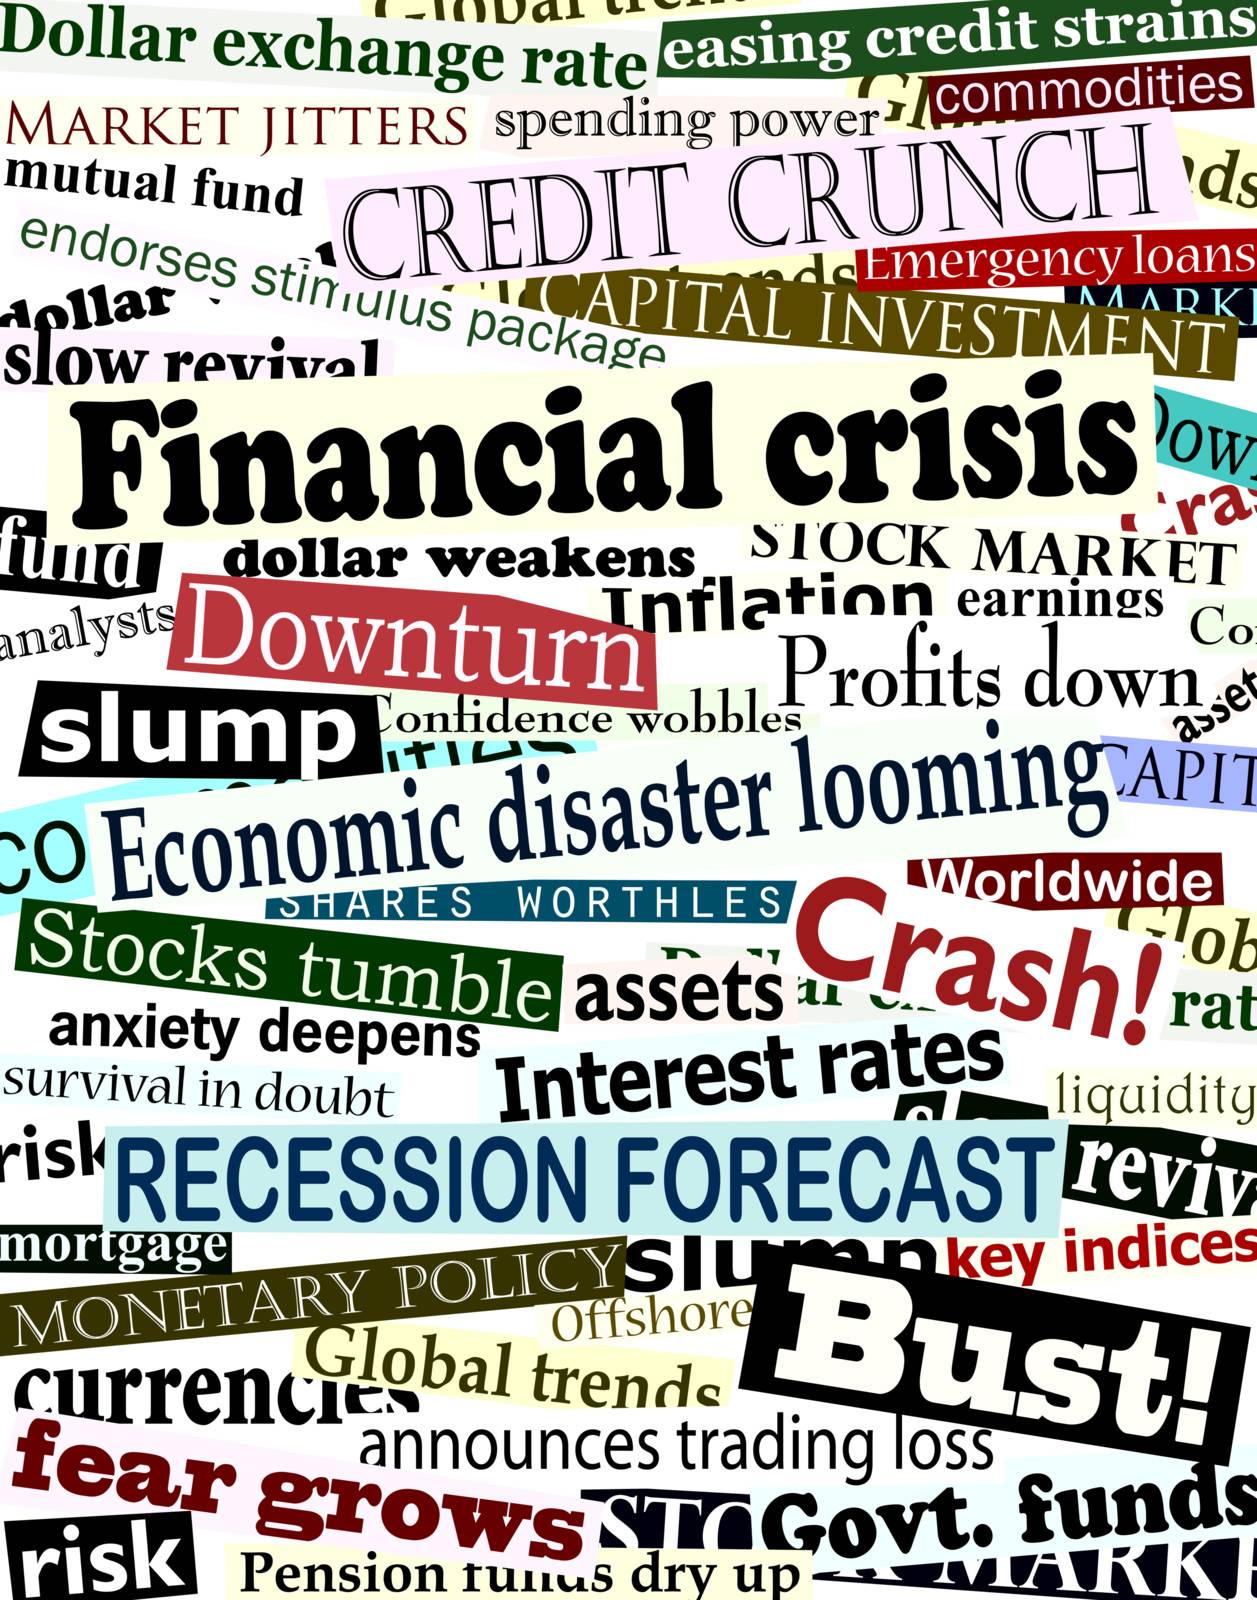 Financial crisis headlines by Tawng